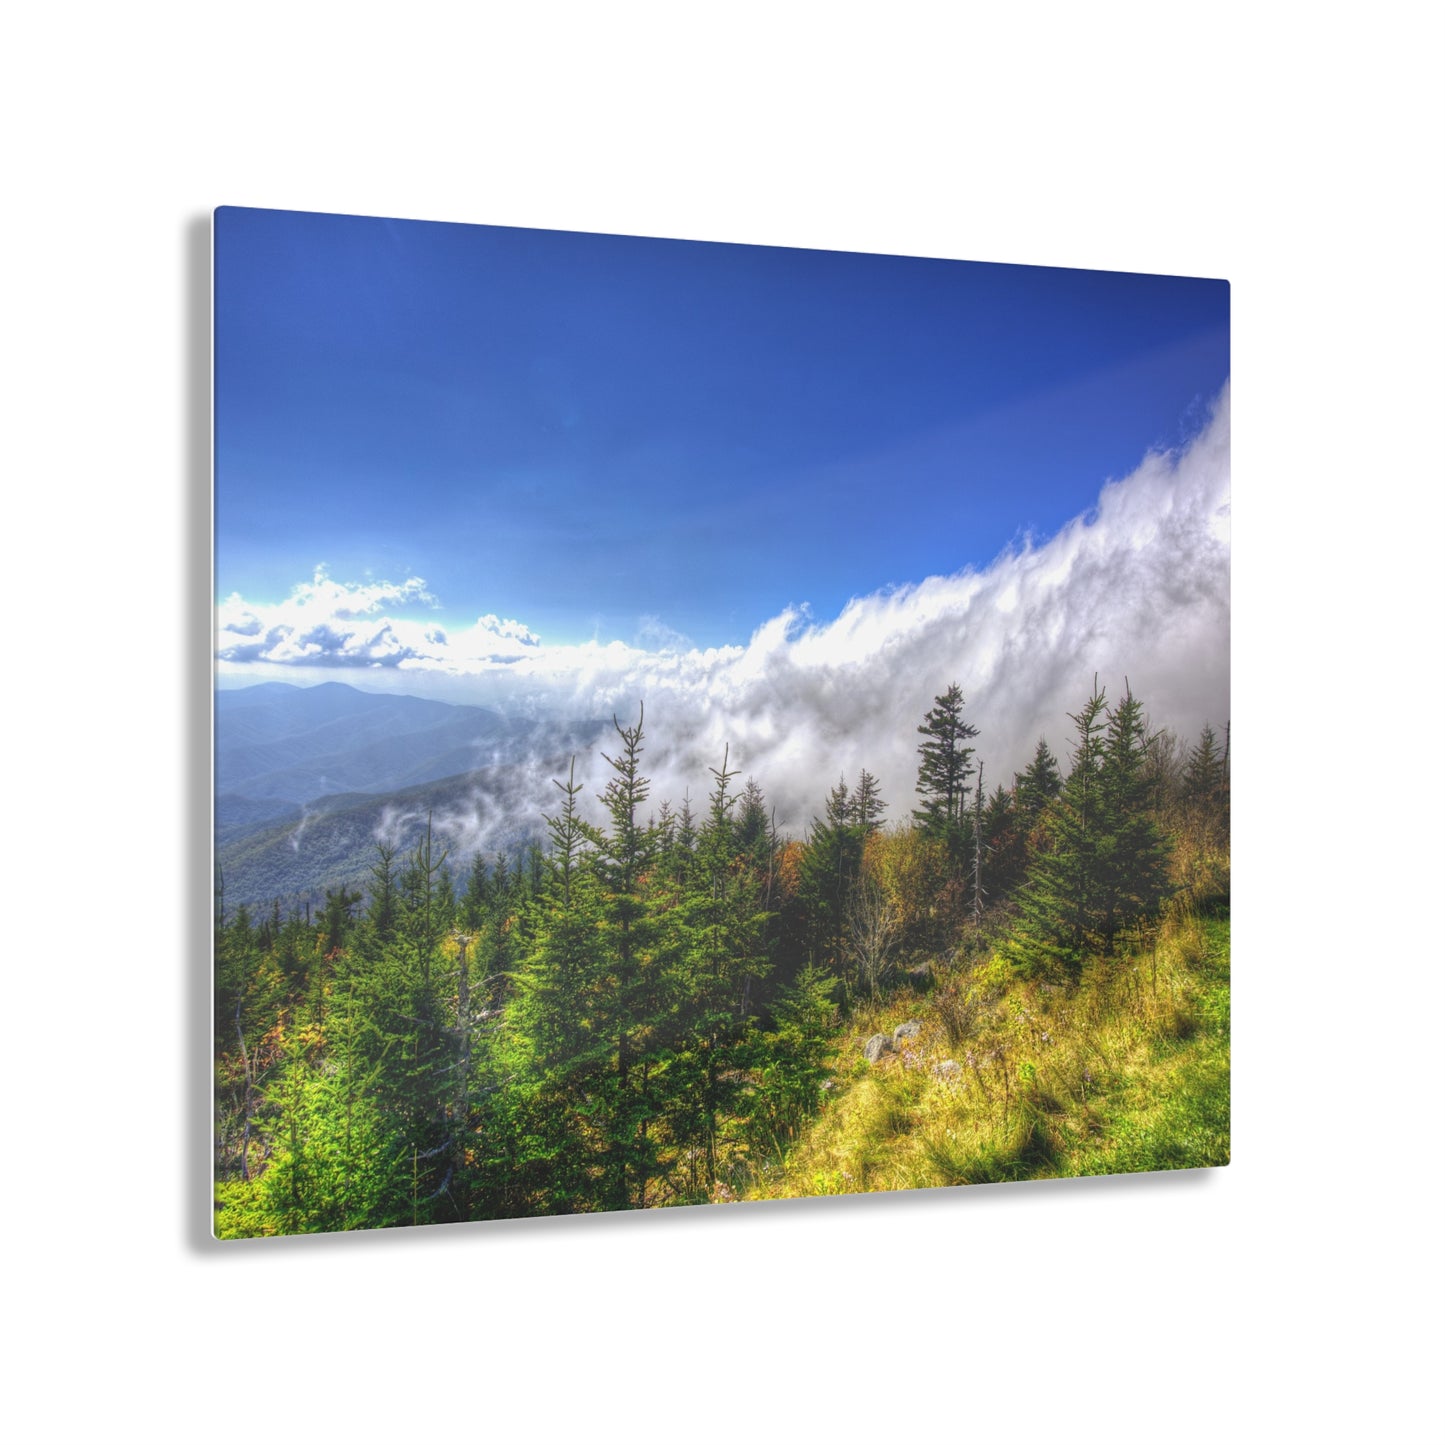 Acrylic Print - Great Smoky Mountains, Tennessee